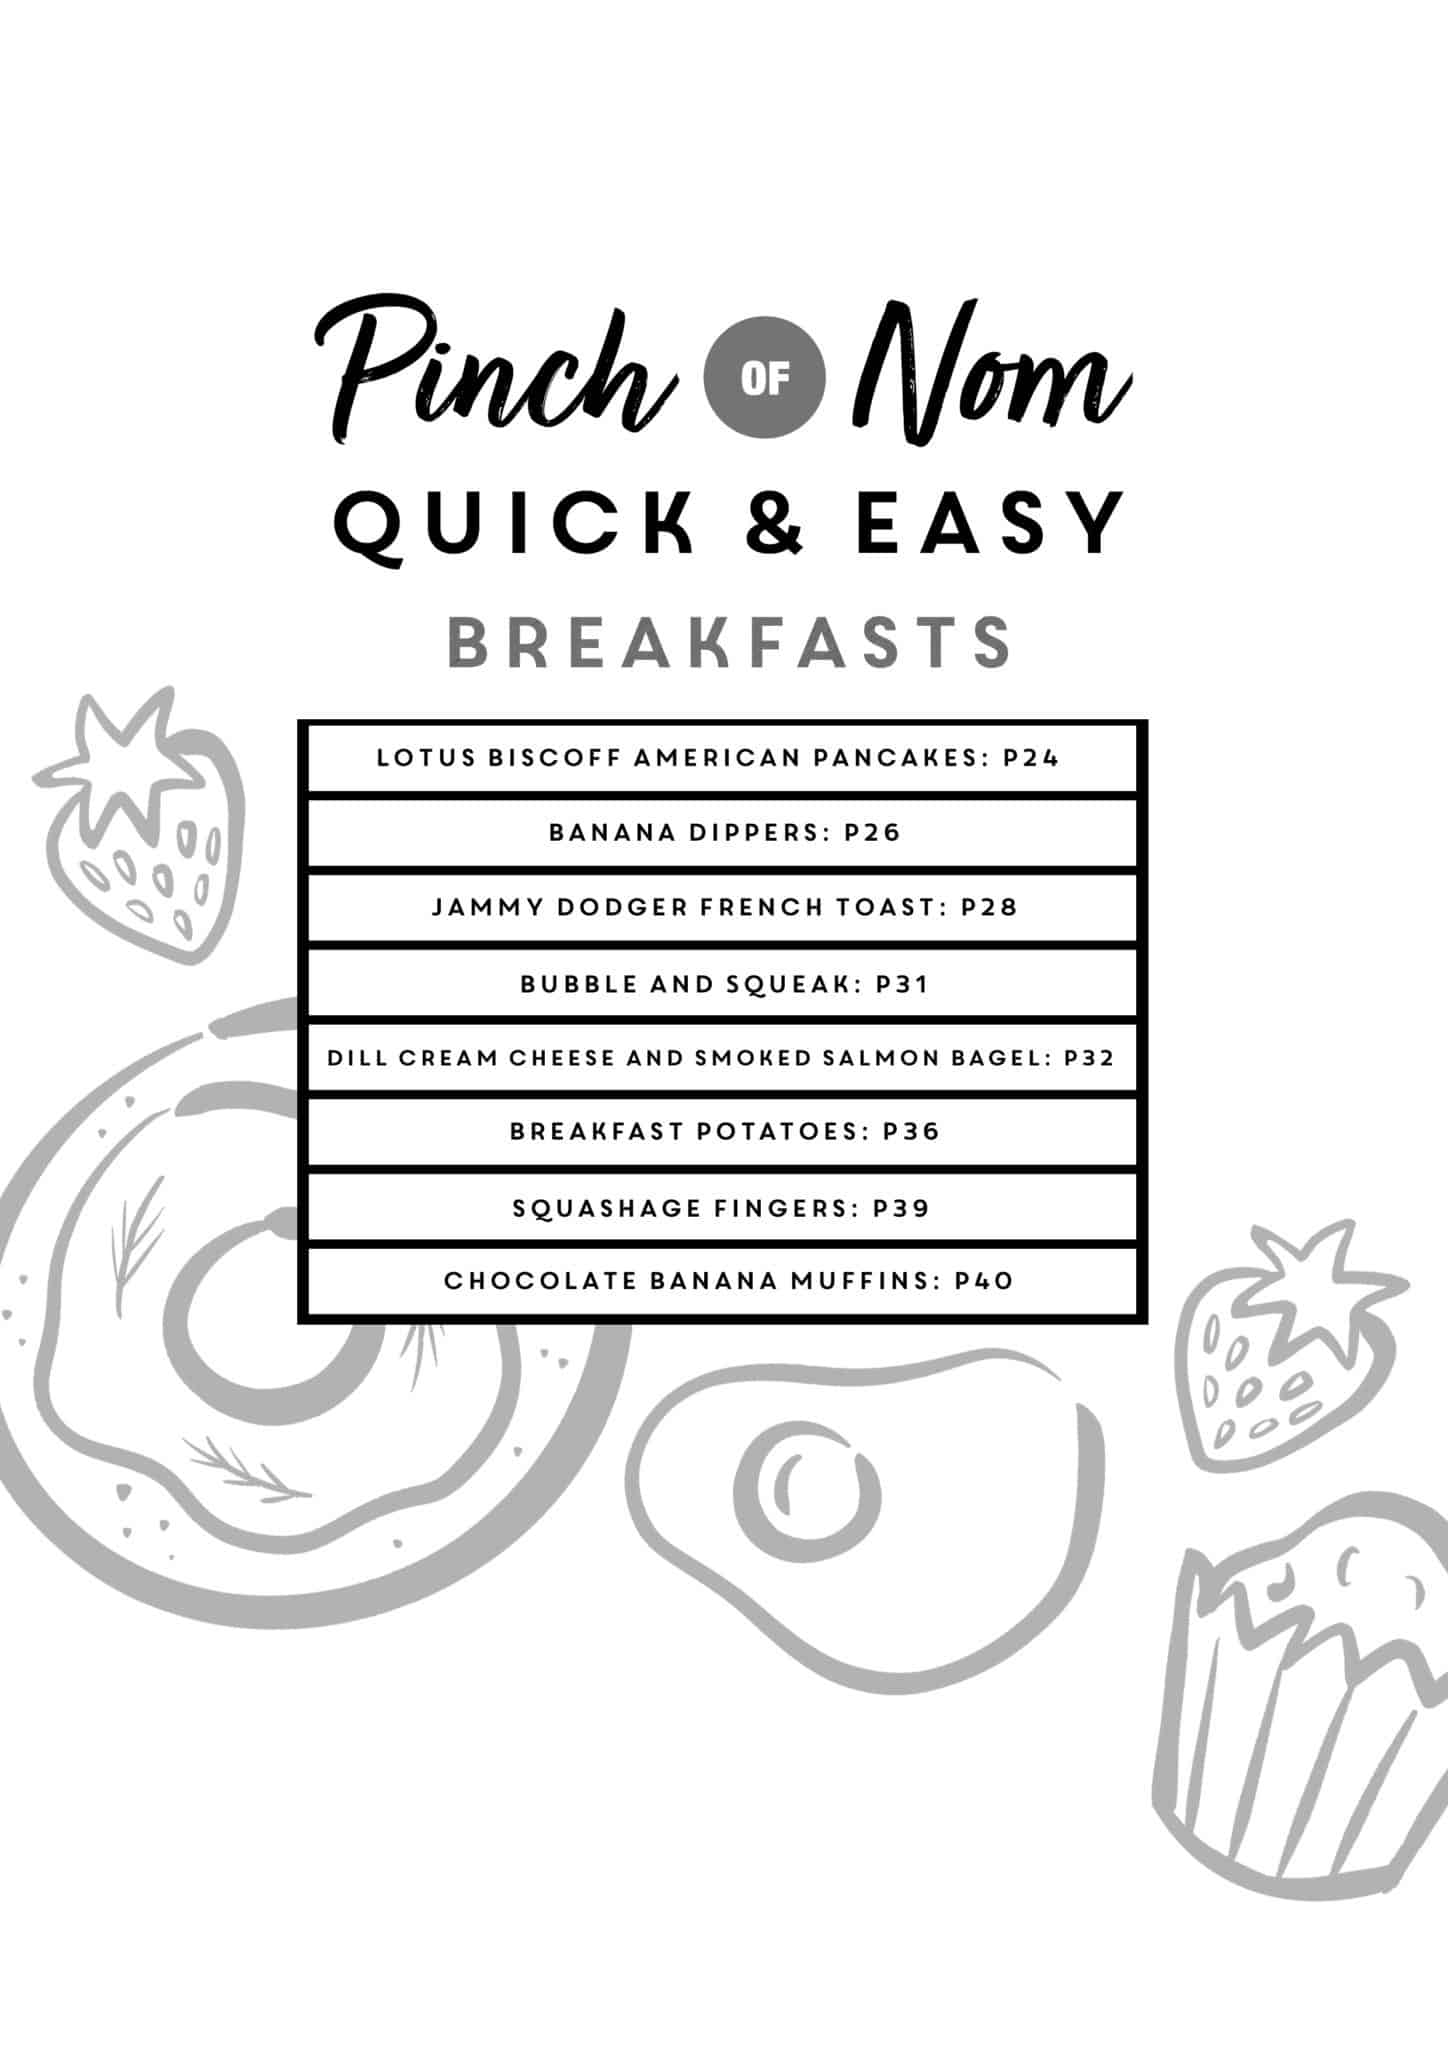 How to pick a recipe from the pinch of nom books - Pinch of Nom Slimming Recipes